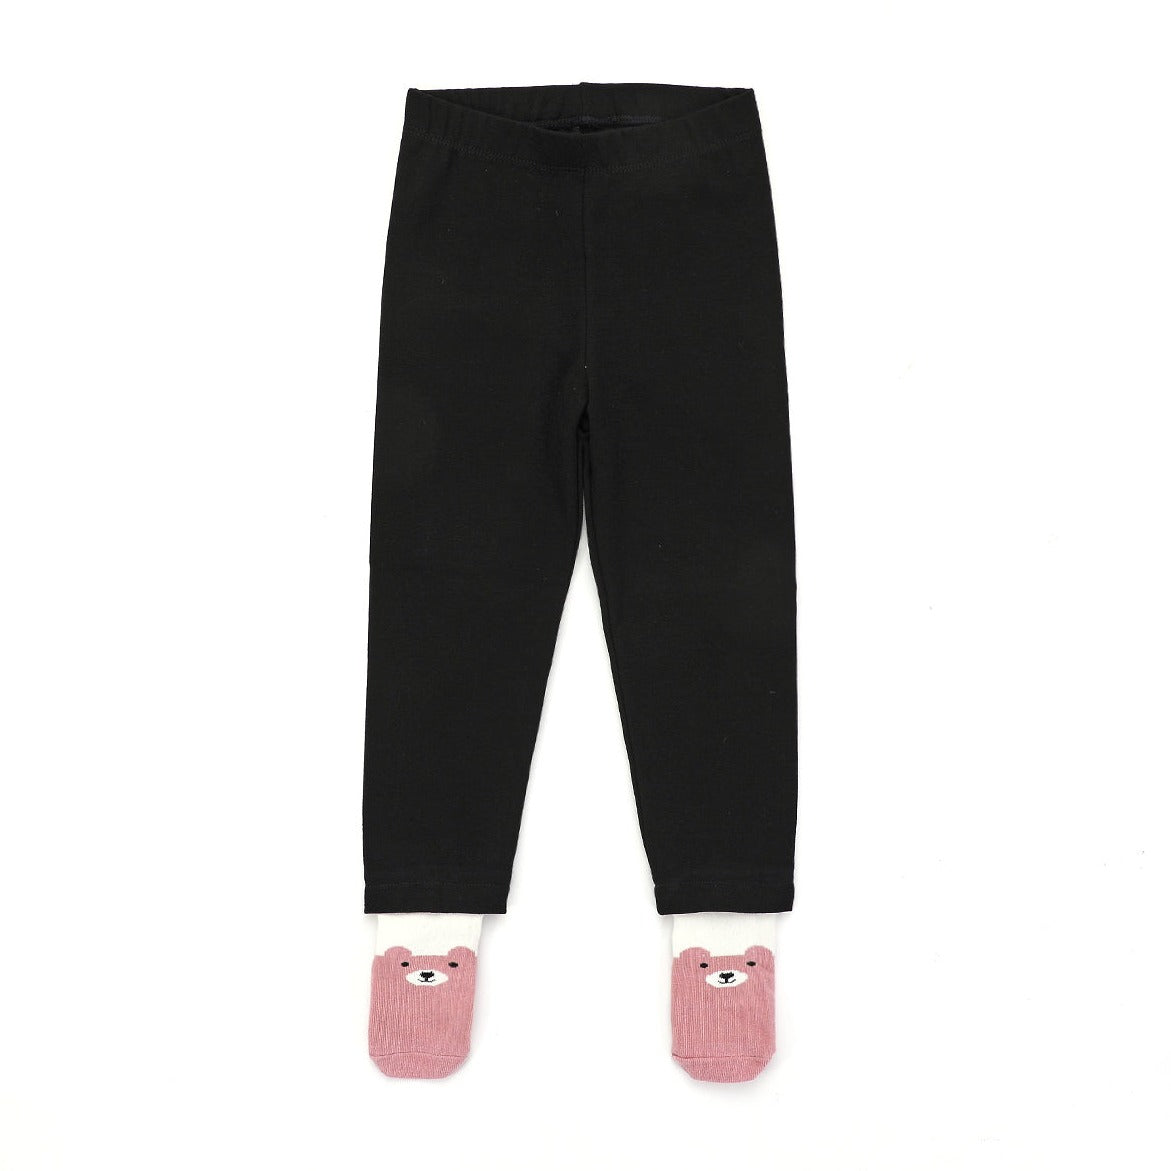 The Teddie - Soft Stretch Legging Footed Bottoms